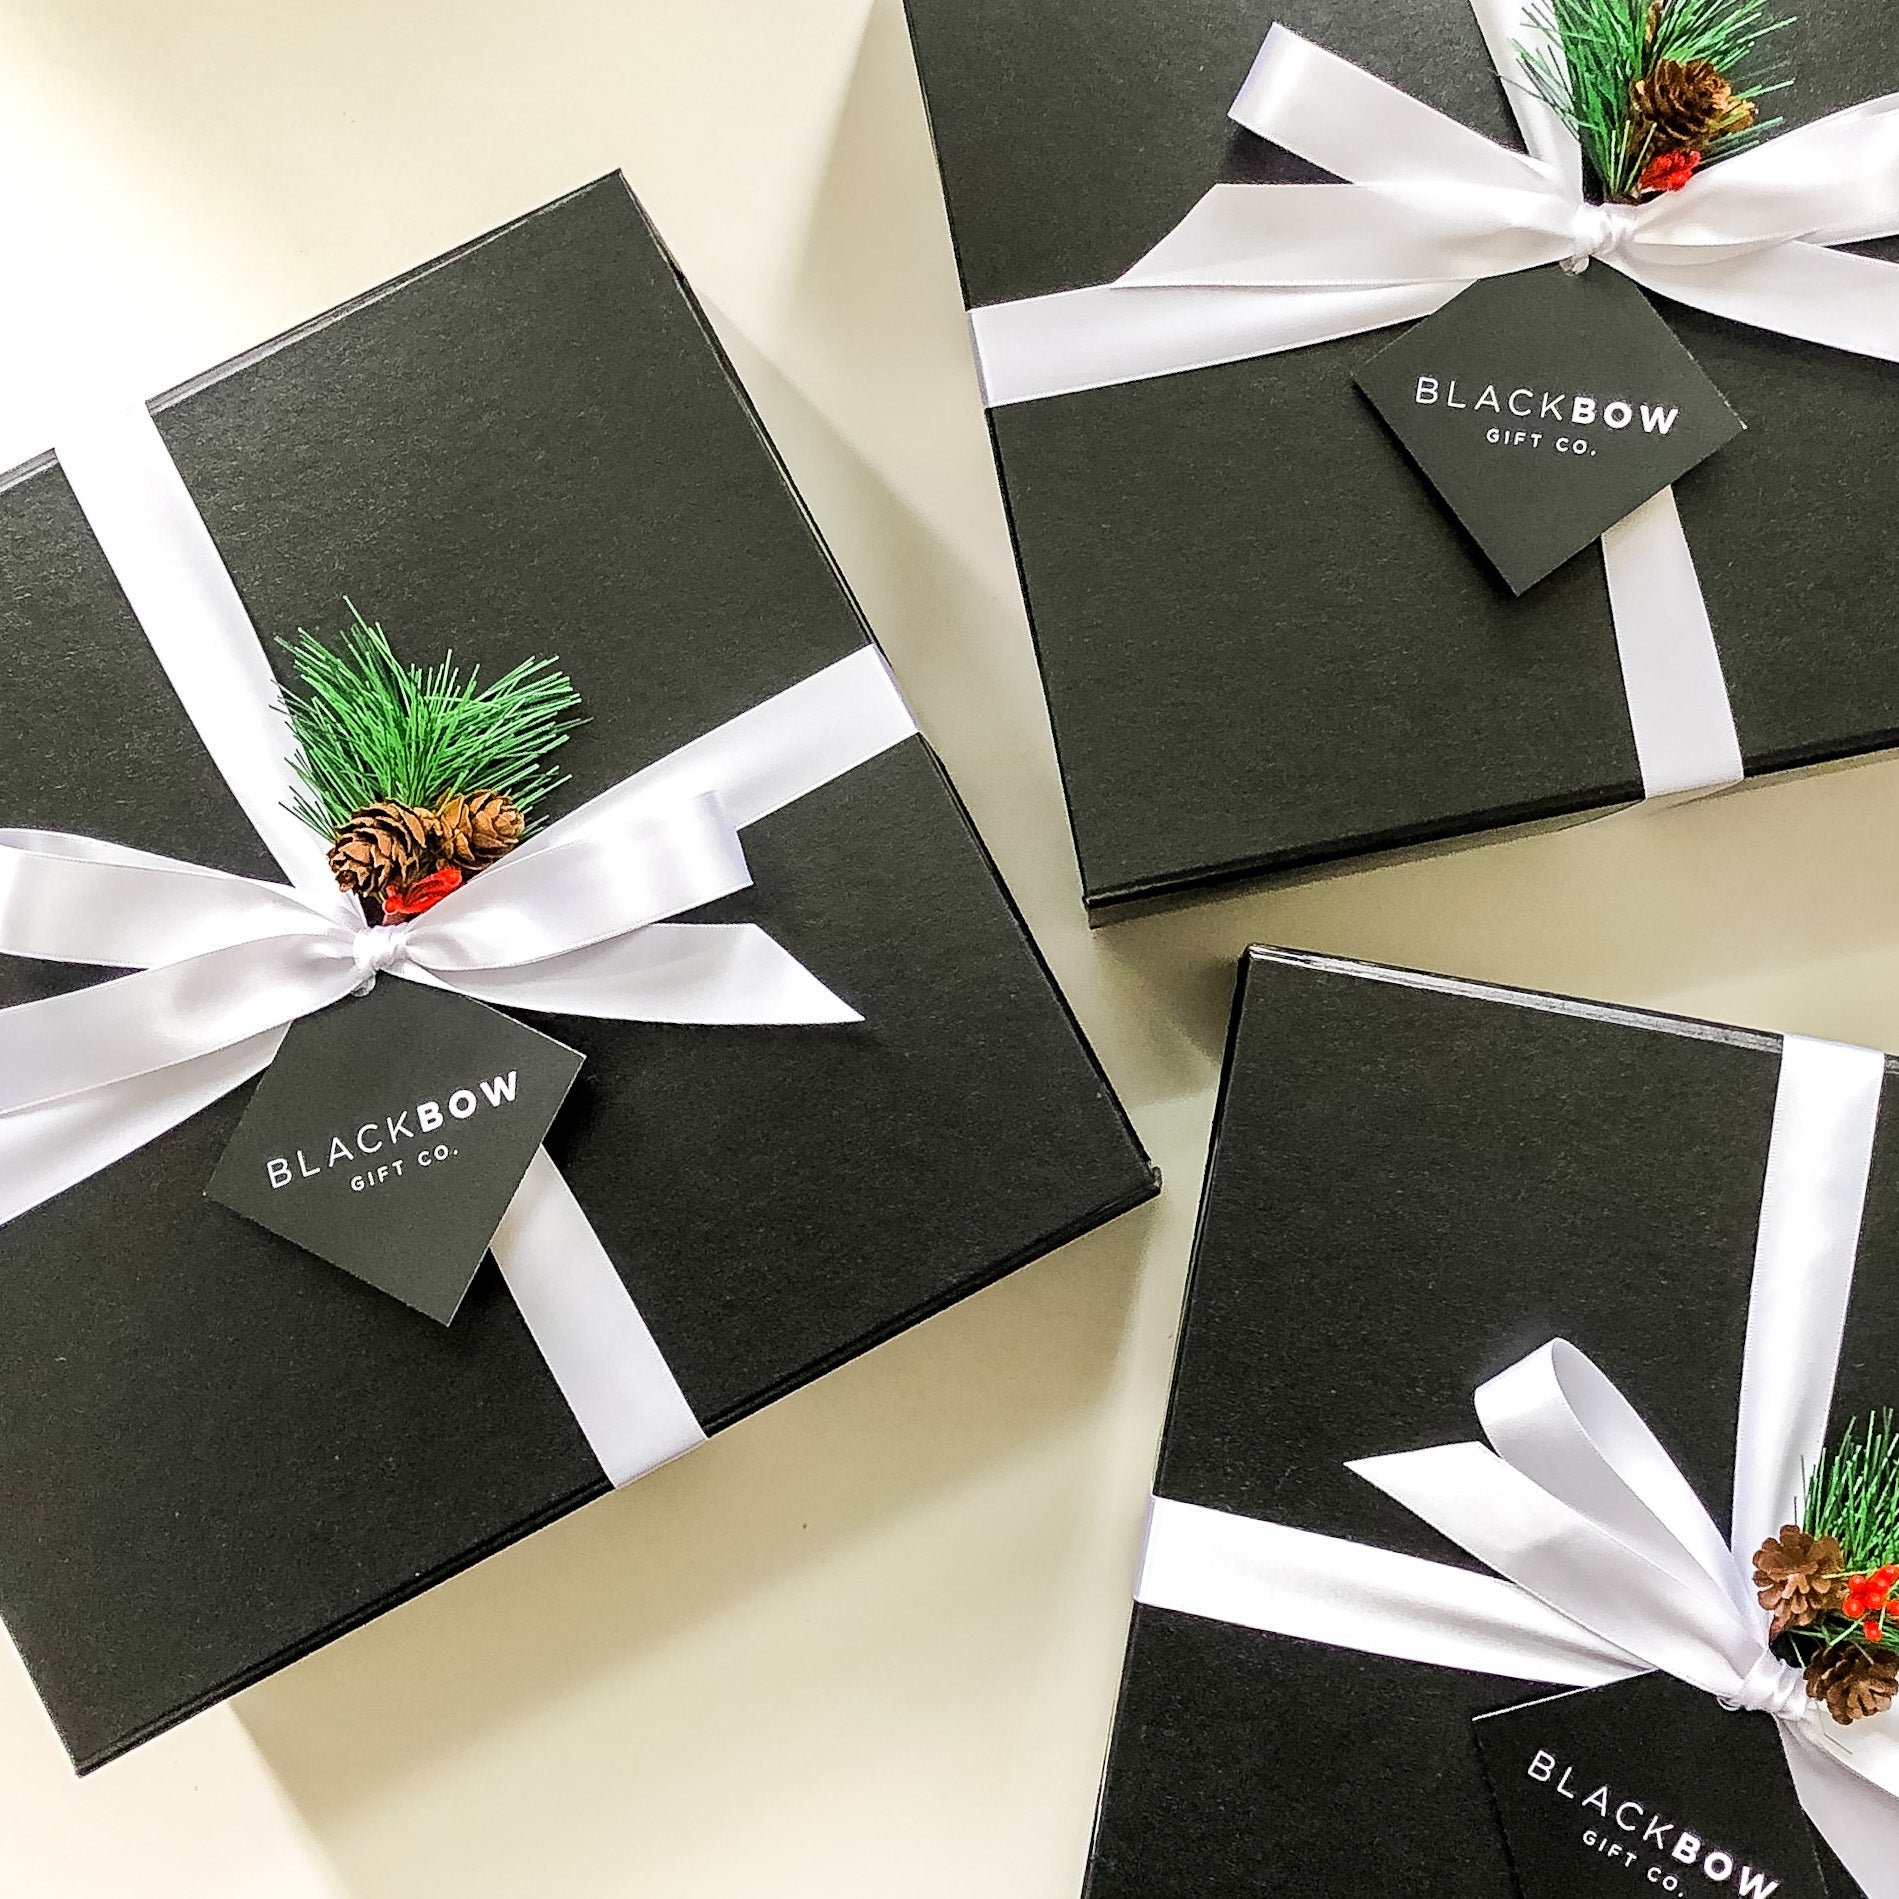 Client and Employee Gifts for the Holidays